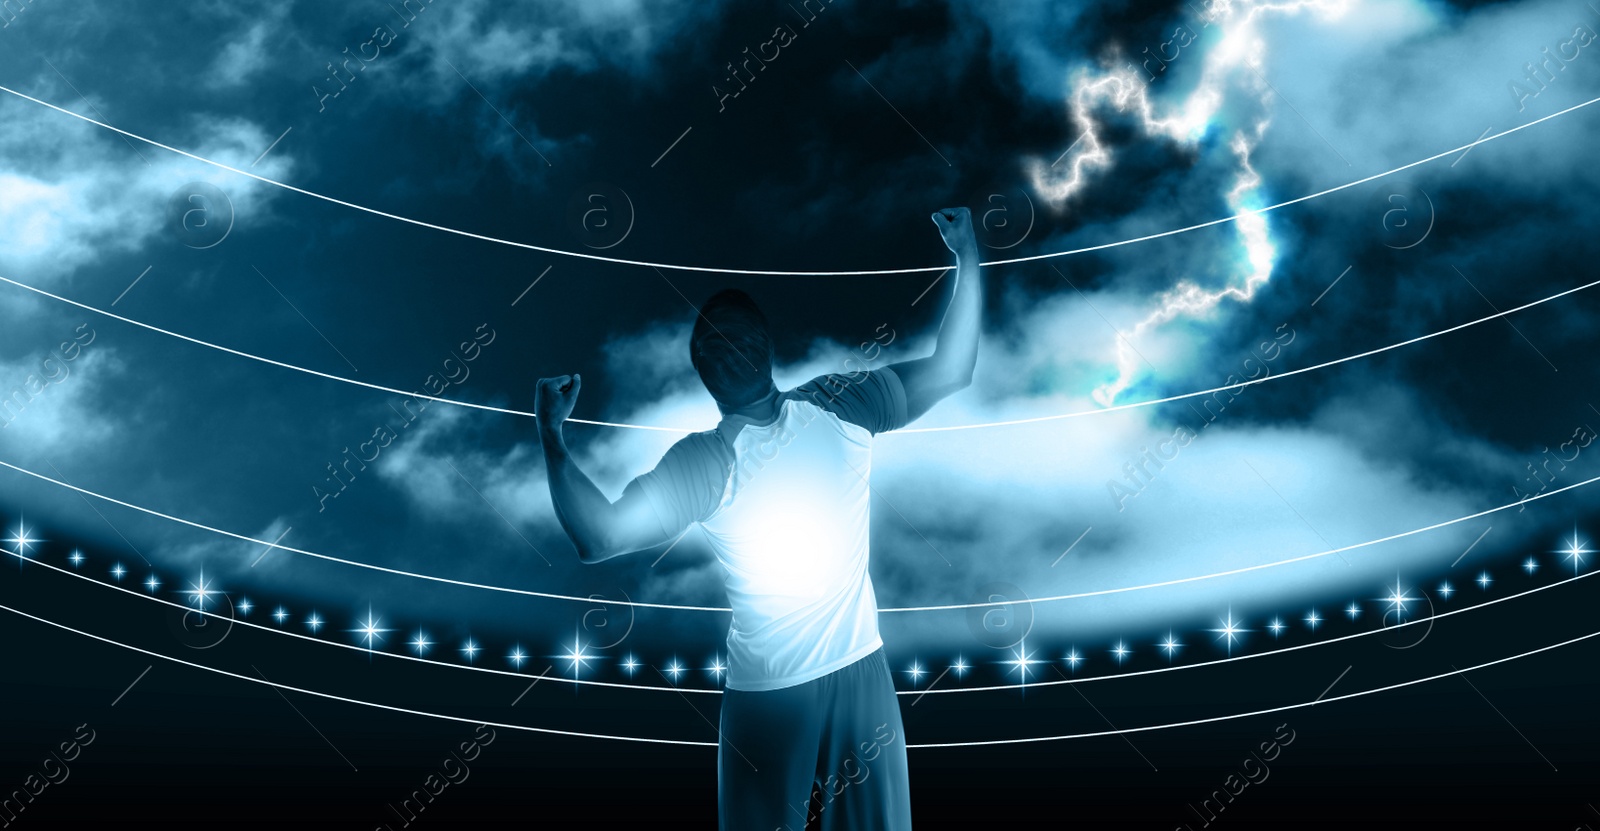 Image of Shot of football player in action. Creative banner design